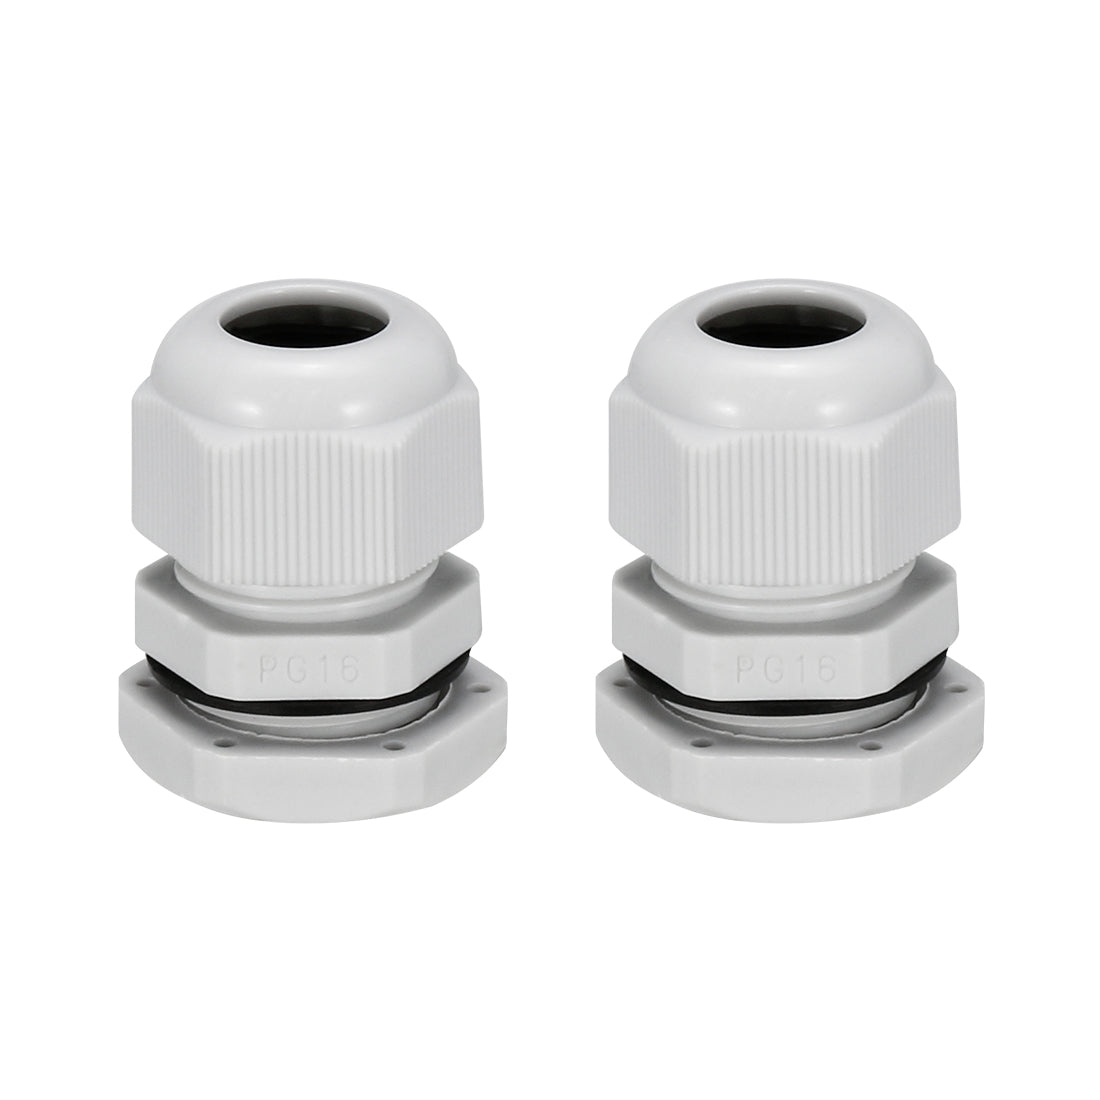 uxcell Uxcell 2Pcs PG16 Cable Gland Waterproof Plastic Joint Adjustable Locknut White for 10mm-13mm Dia Cable Wire